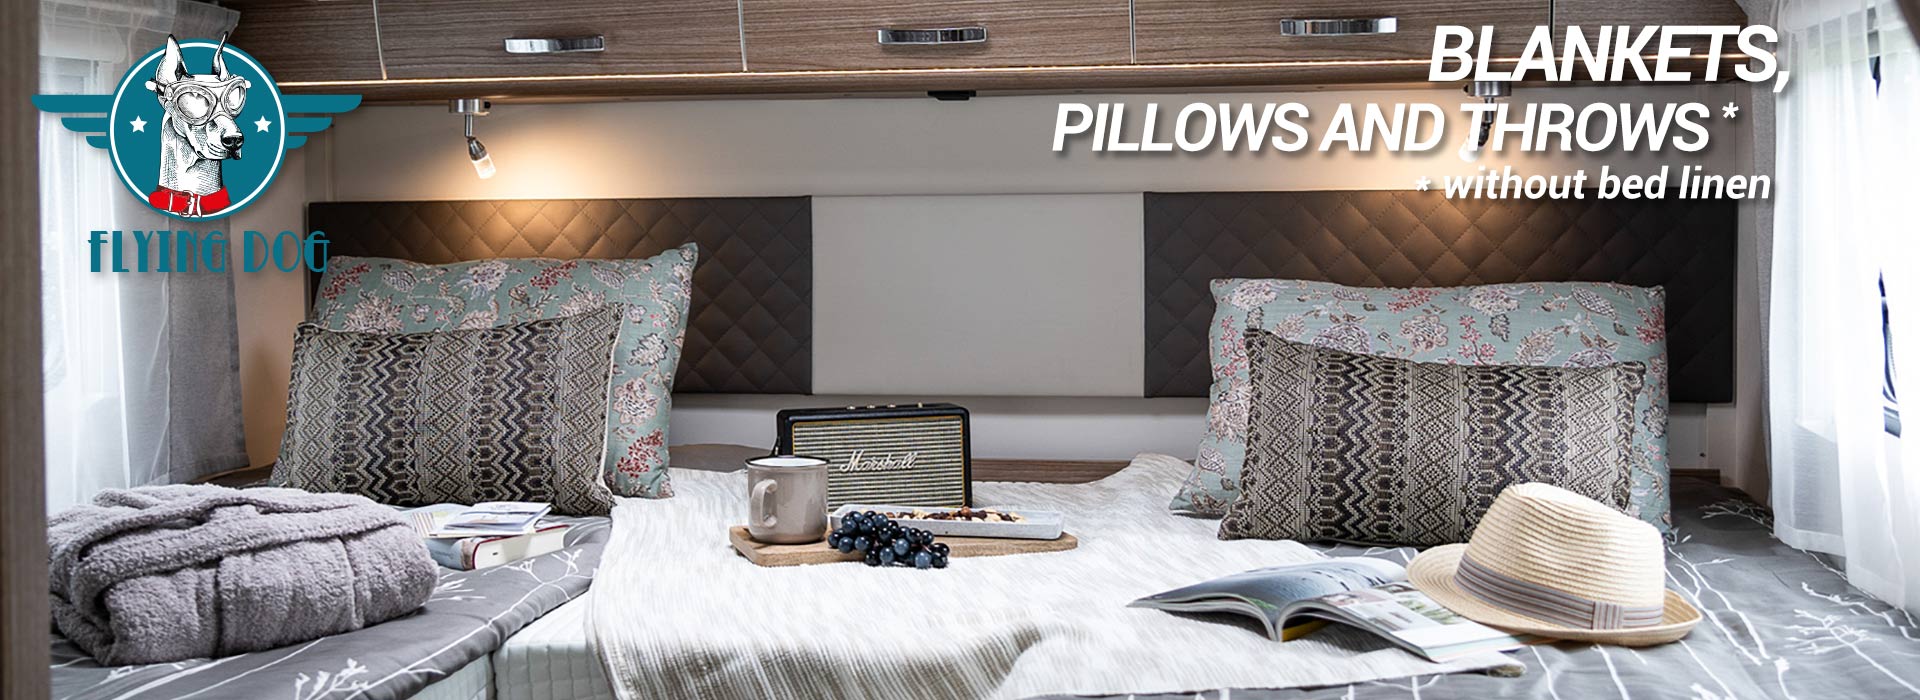 Blankets, Pillows and Throws